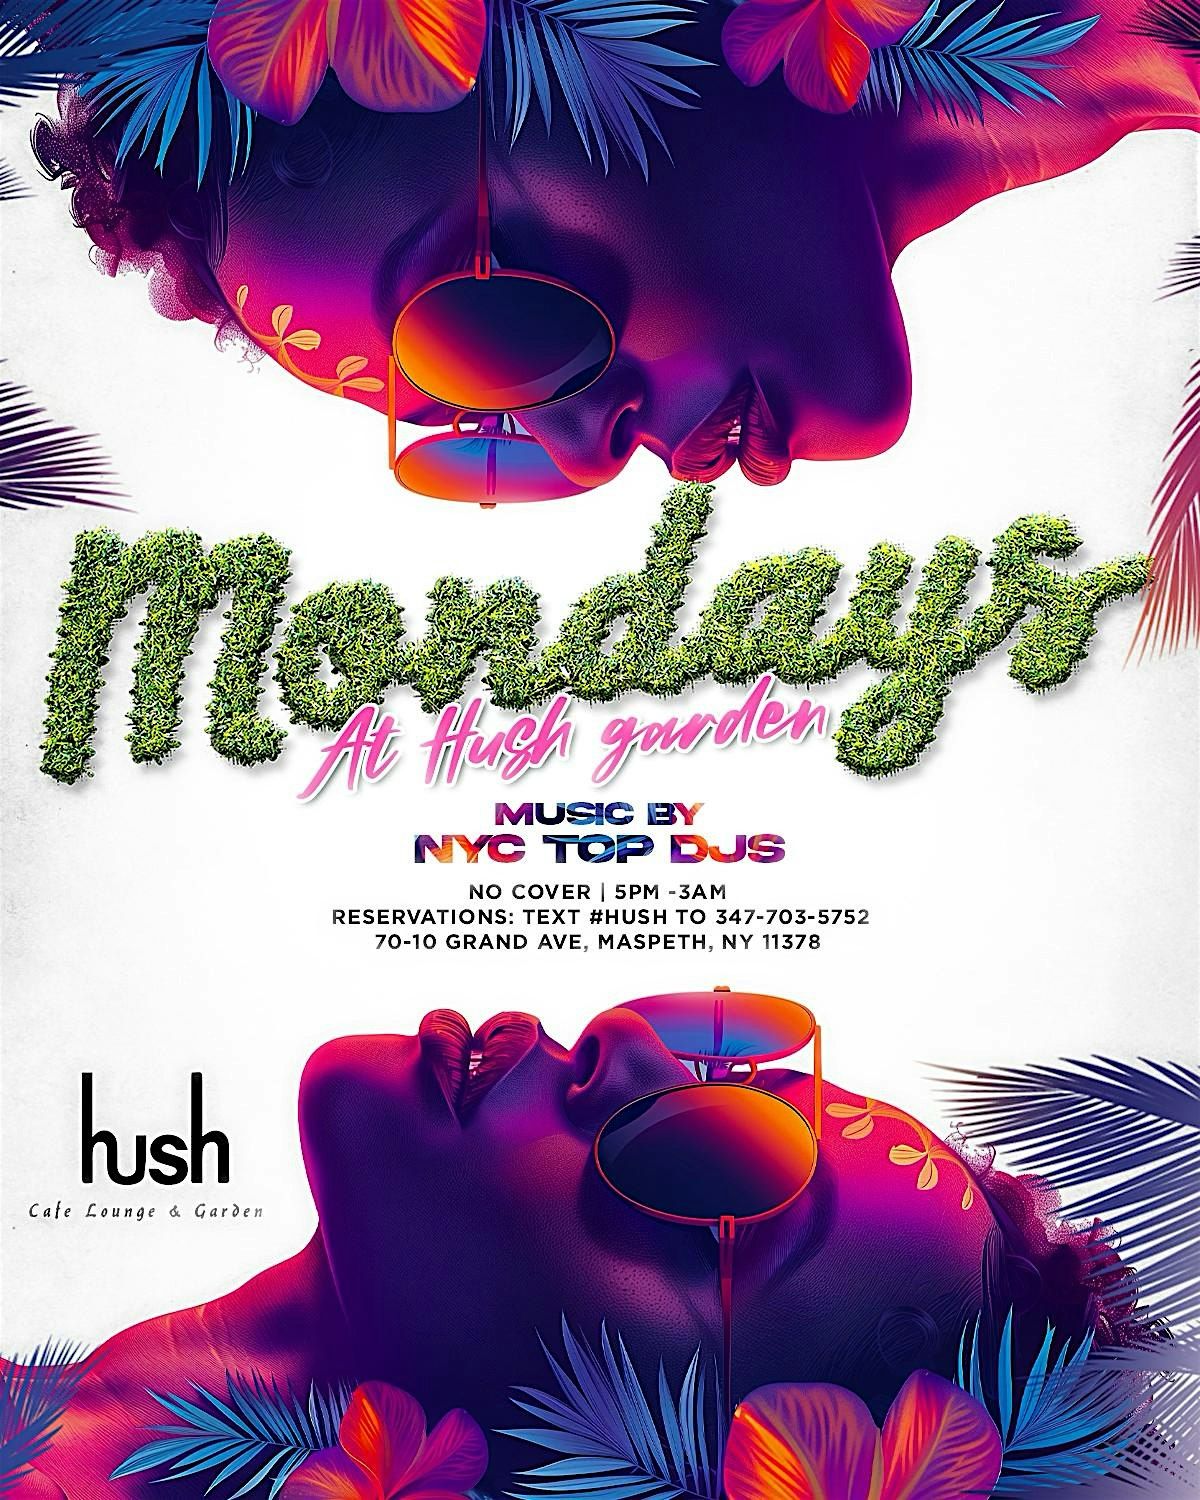 M O N D A Y S  AT HUSH GARDEN